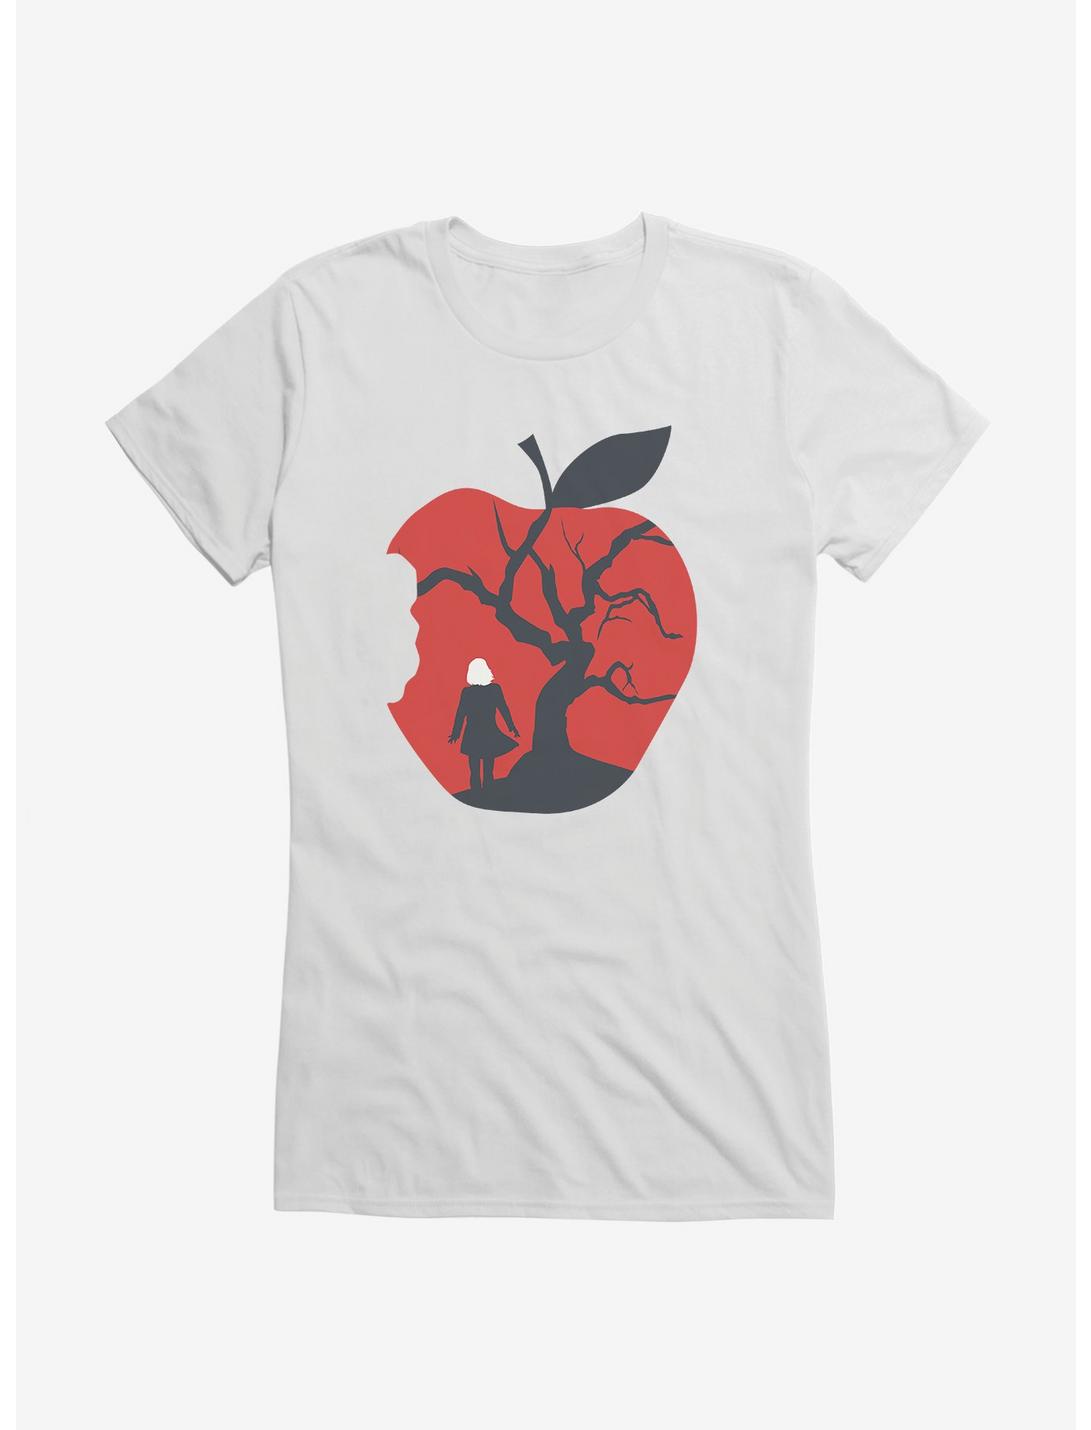 Chilling Adventures Of Sabrina Apple Tree Icon Girls T-Shirt, WHITE, hi-res